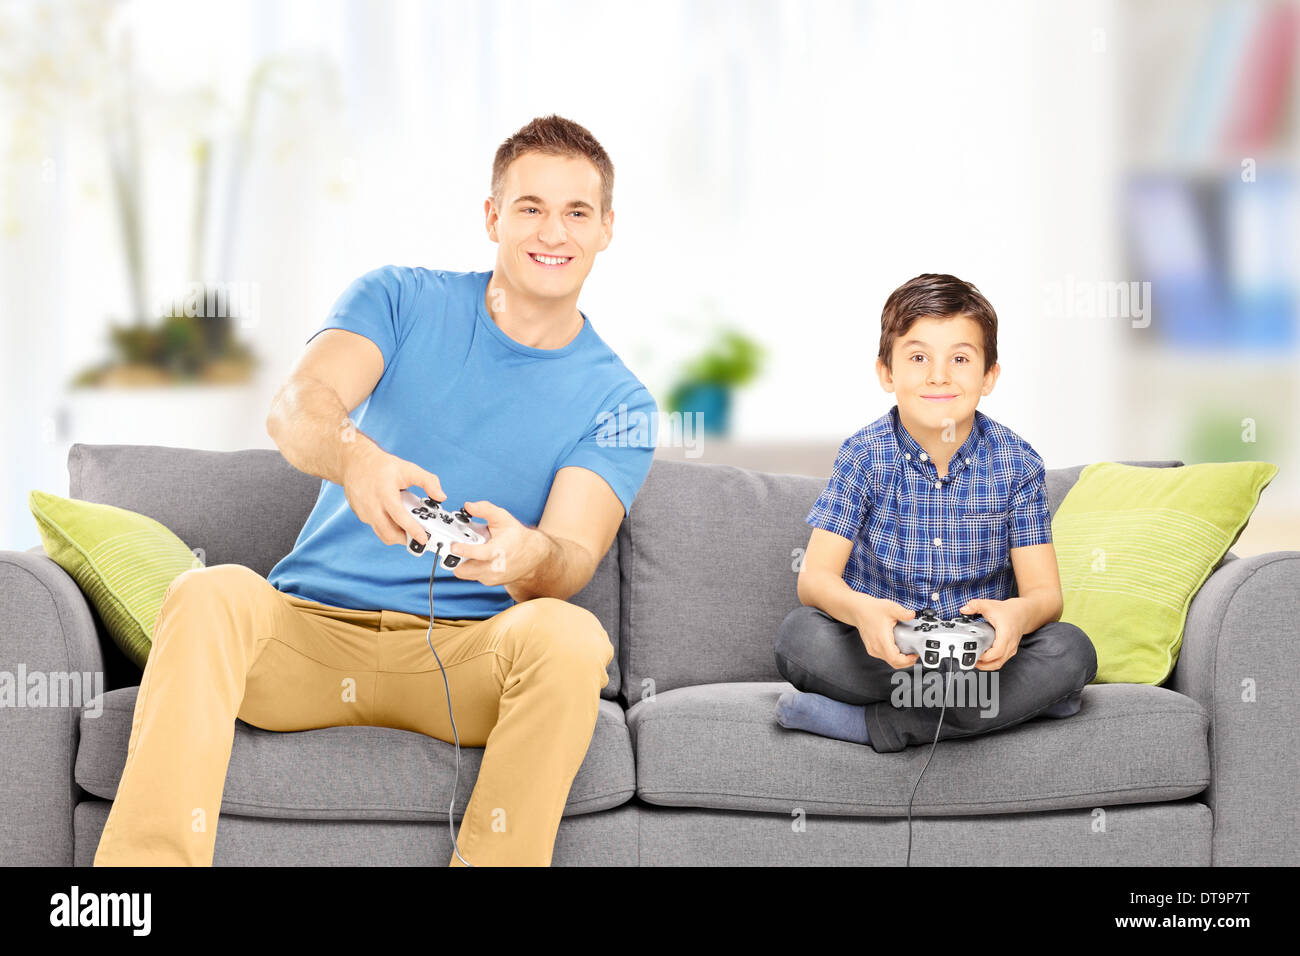 Young man playing video game with his younger cousin, at home Stock Photo